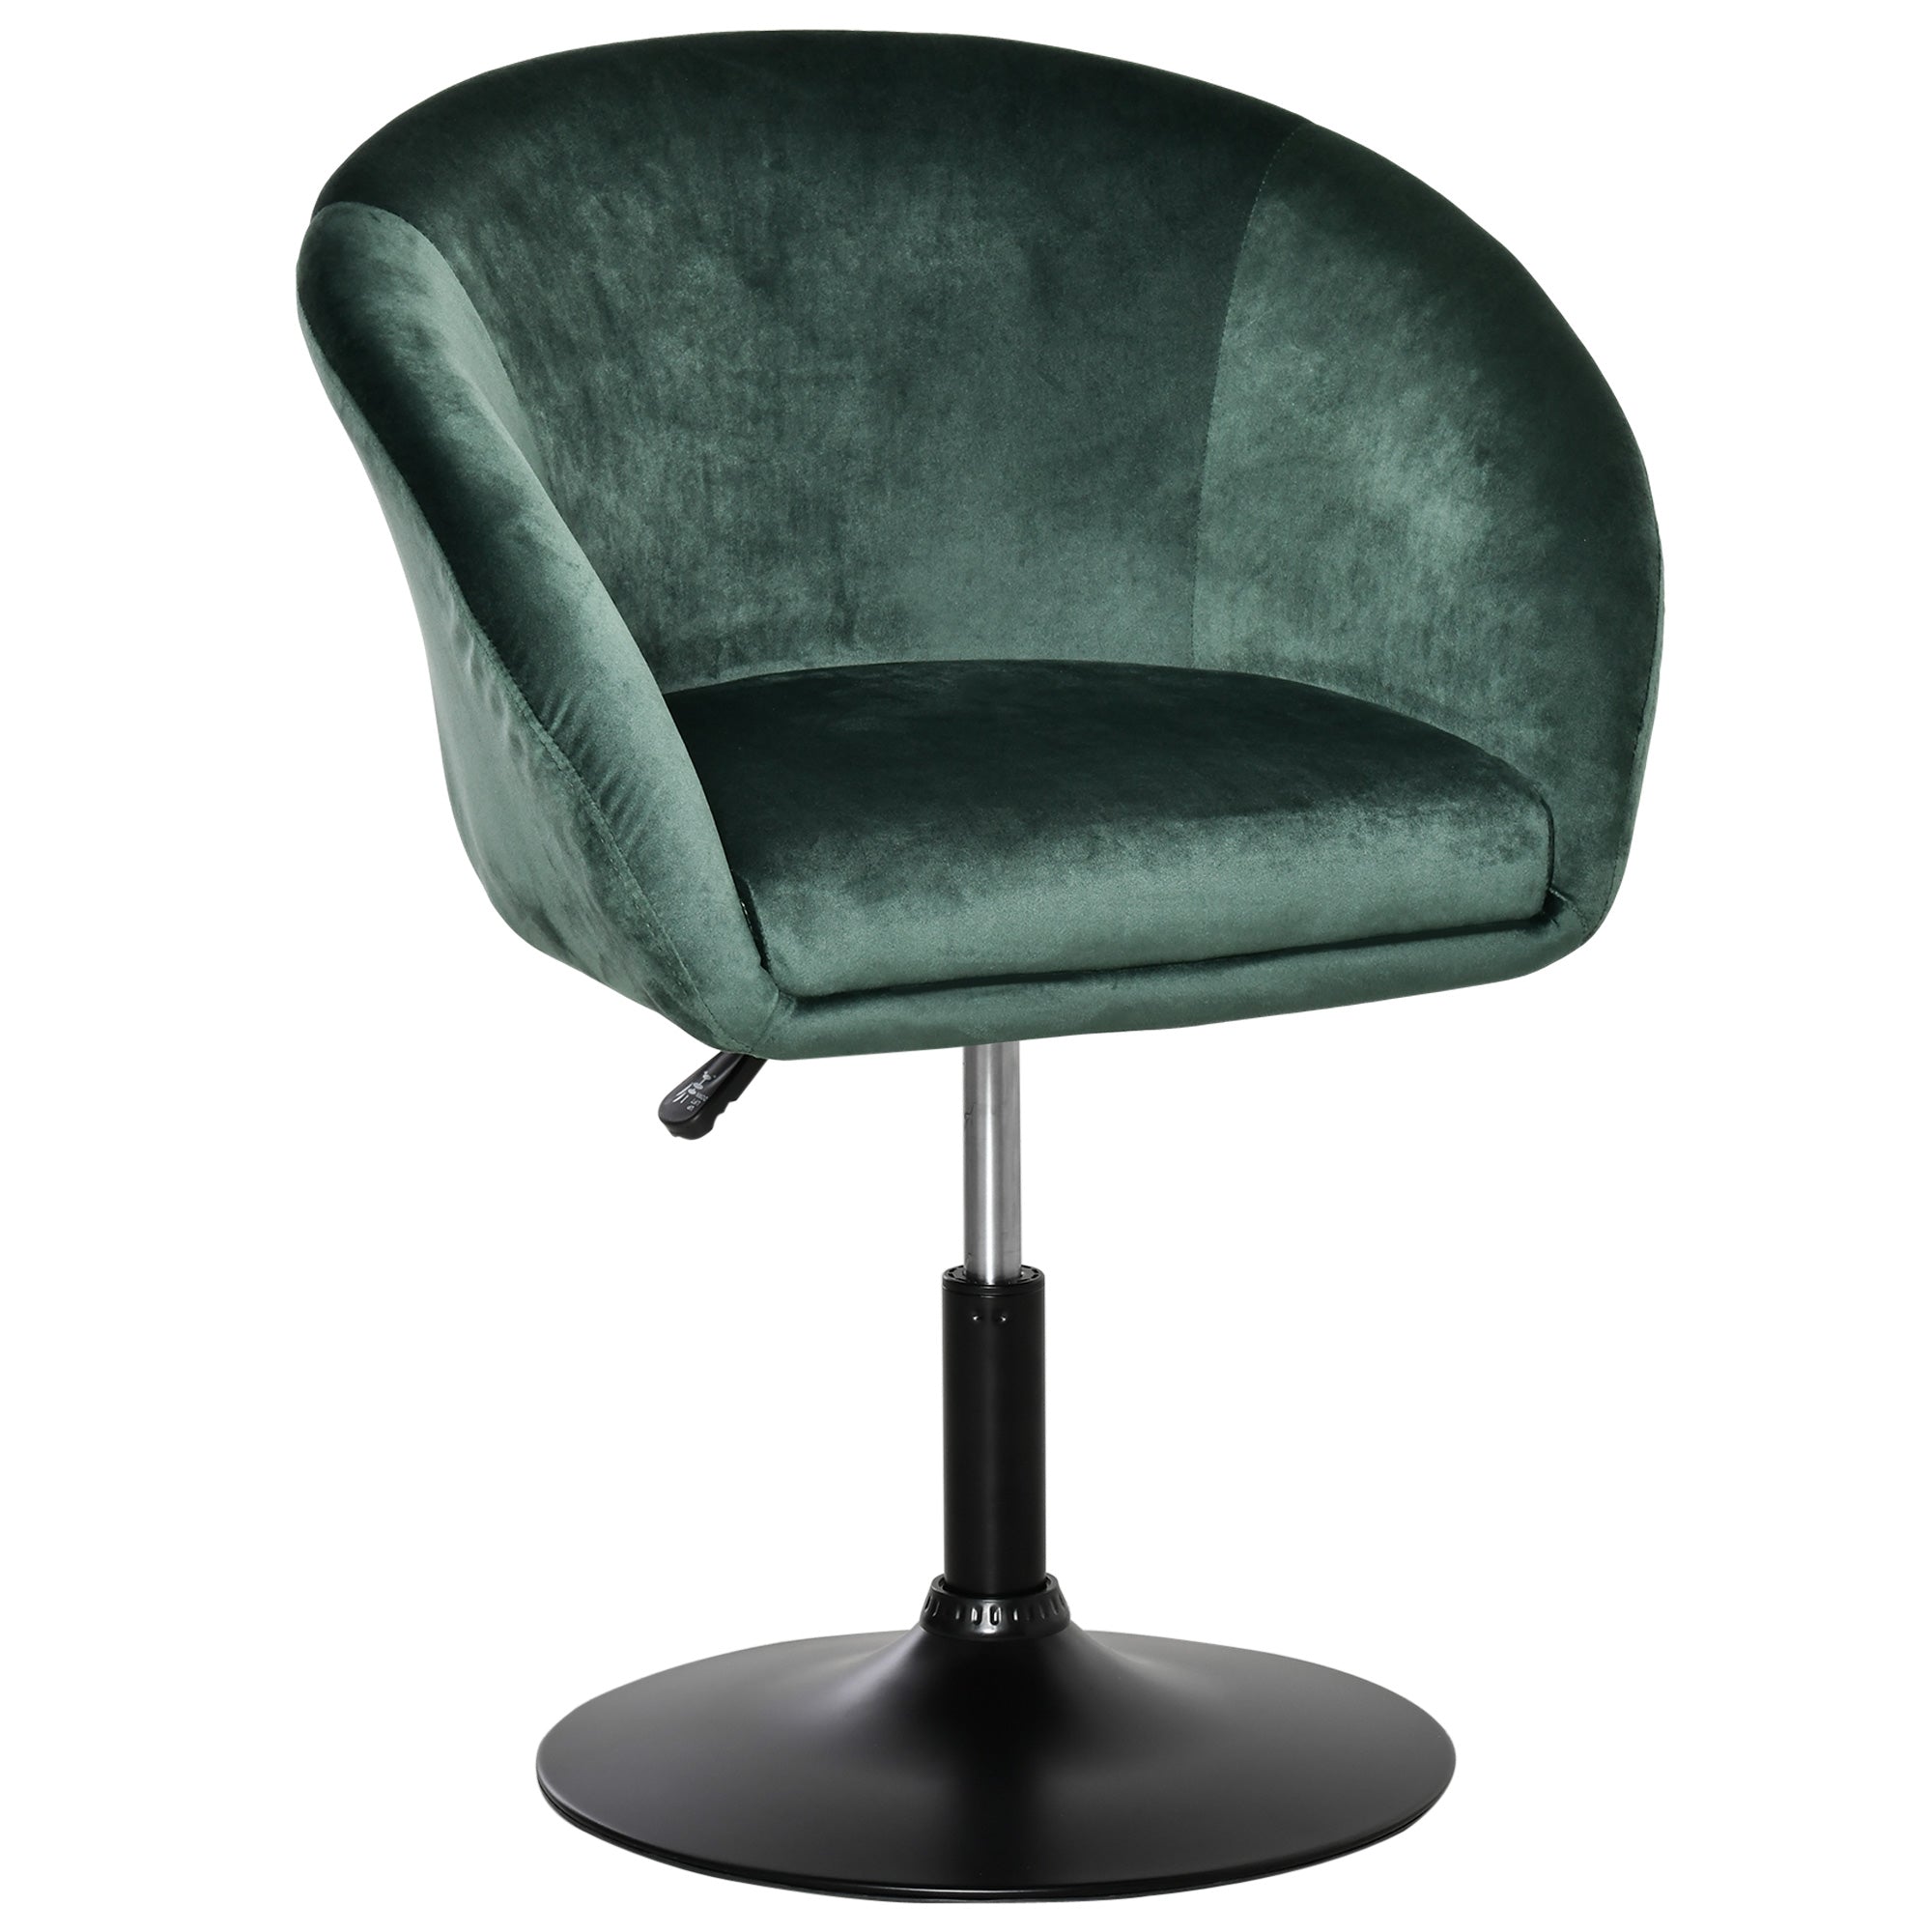 Swivel Bar Stool Fabric Dining Chair Dressing Stool with Tub Seat, Back, Adjustable Height, Green  AOSOM   